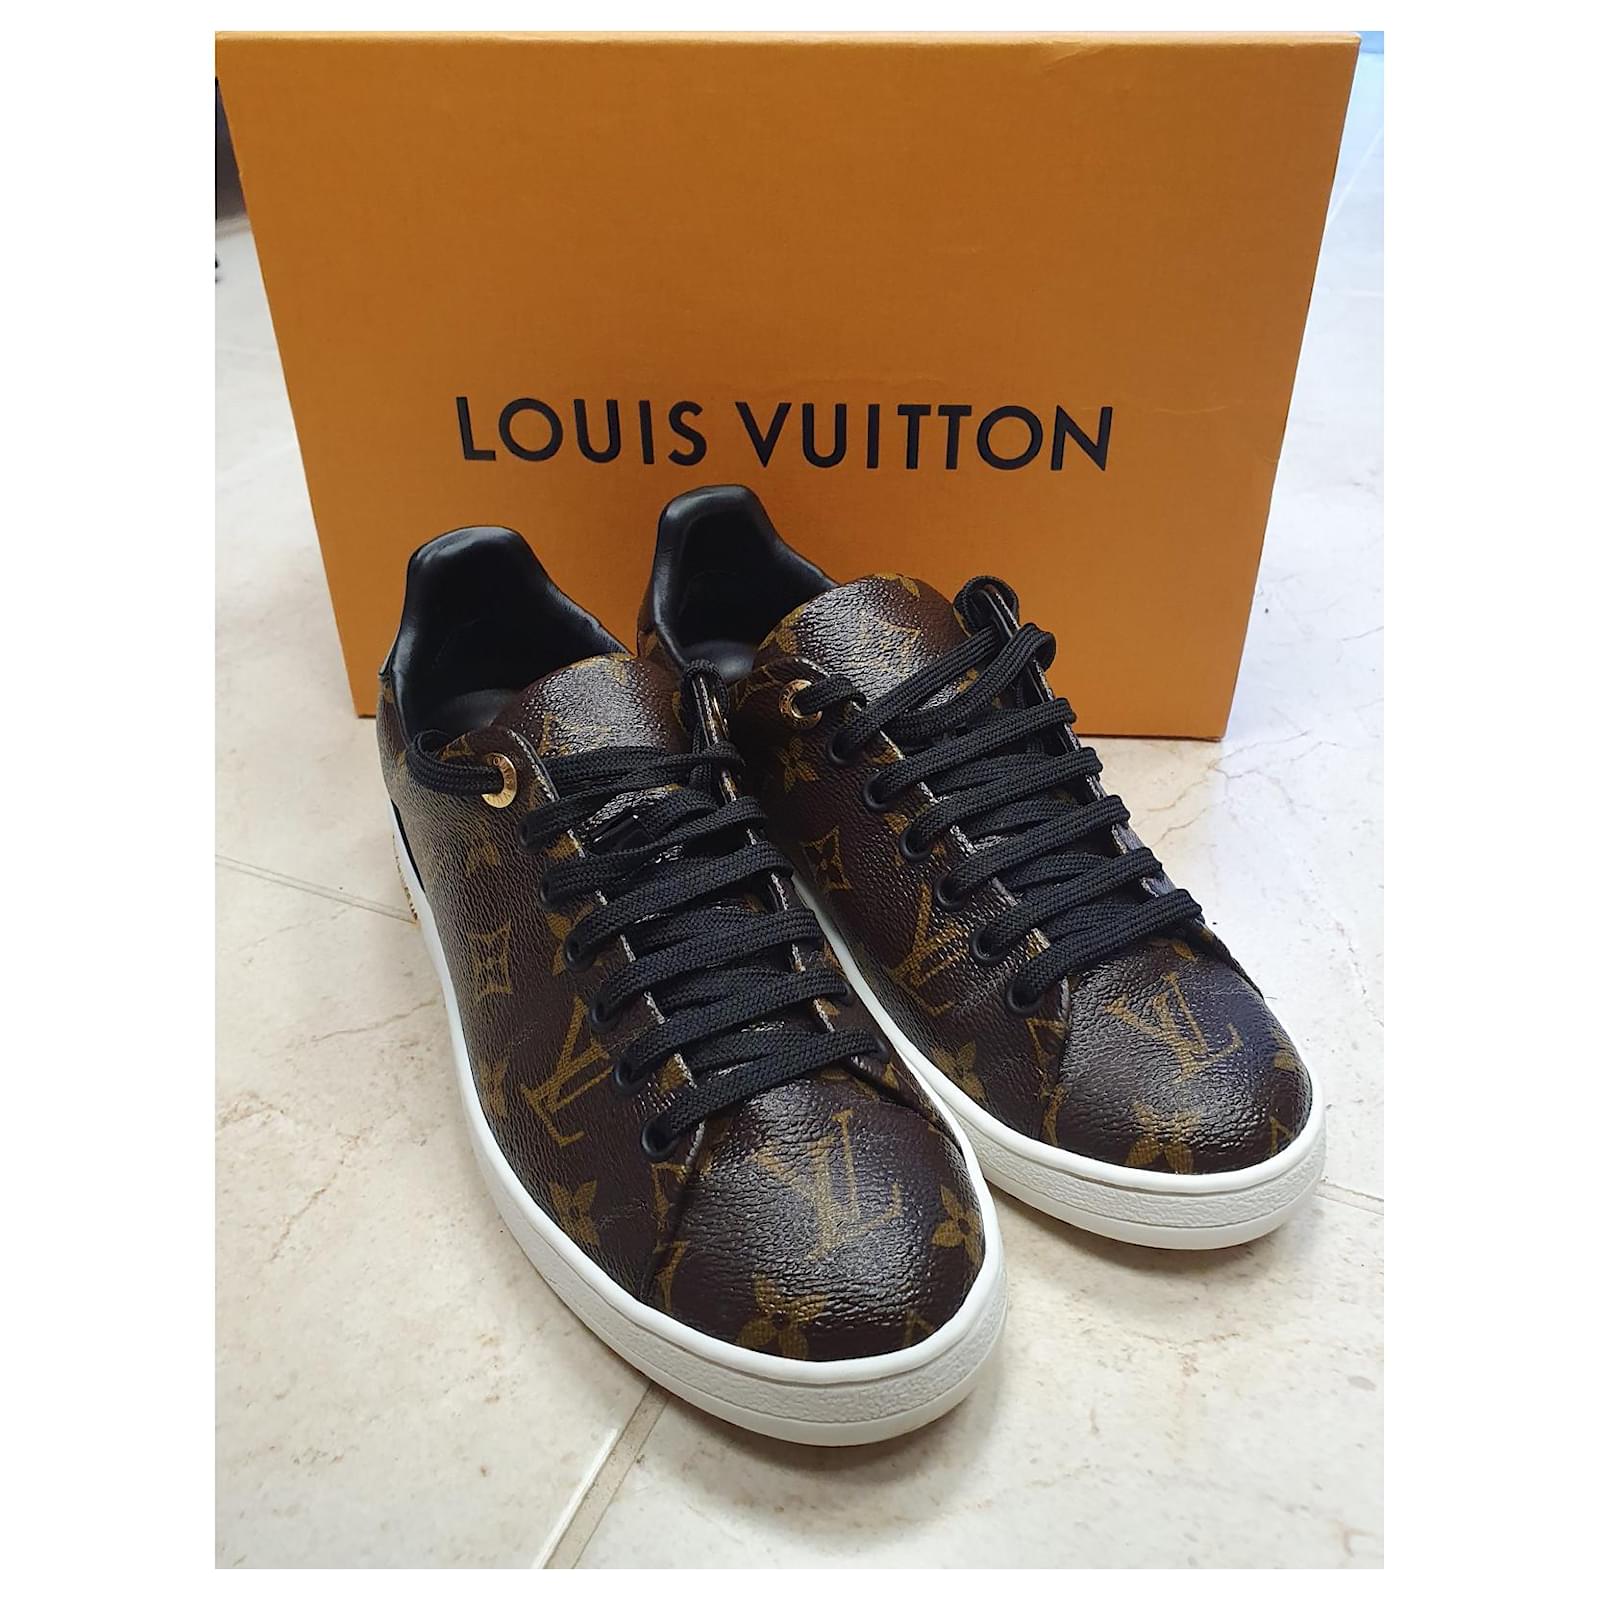 Frontrow leather trainers Louis Vuitton Brown size 37.5 EU in